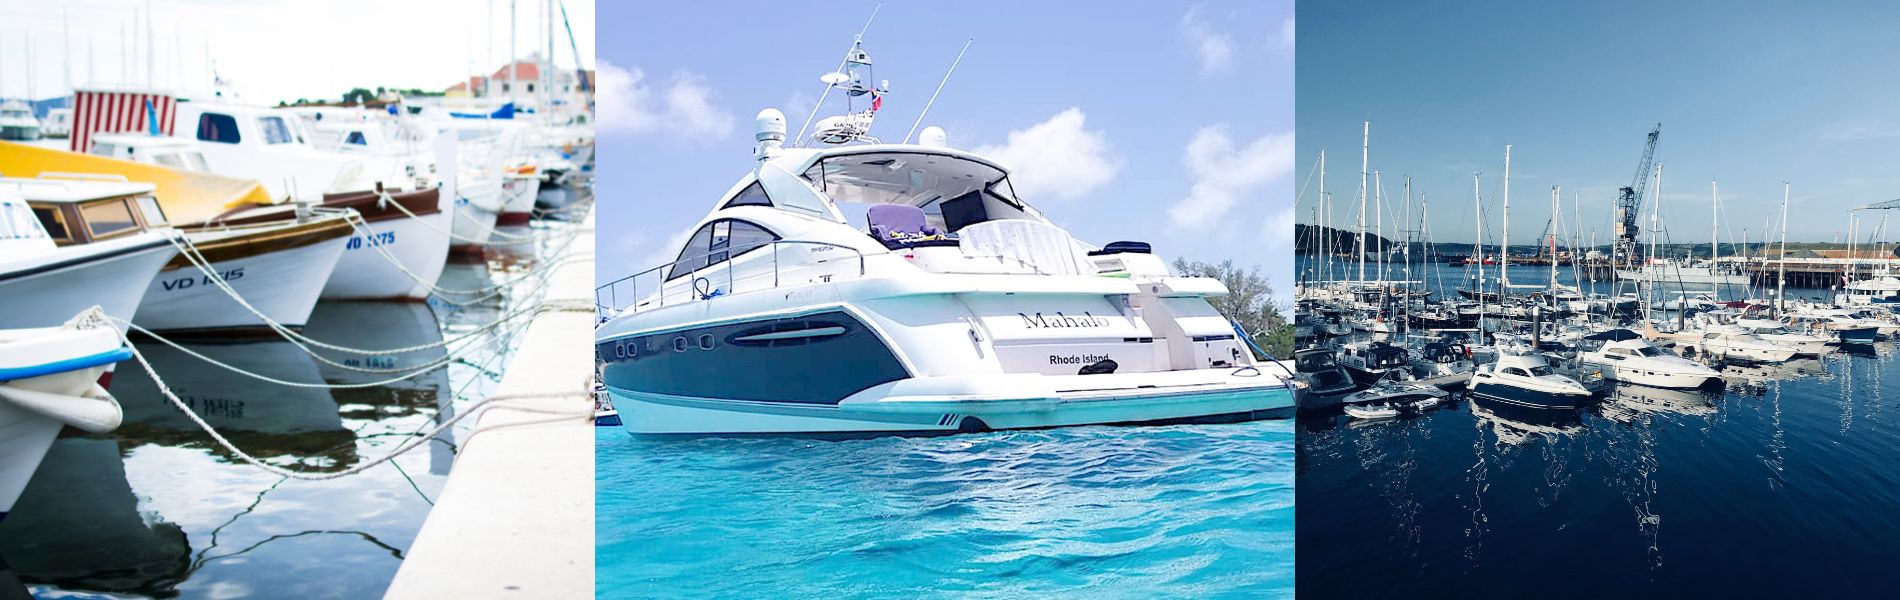 ugo® Will Be at the 2022 Fort Lauderdale International Boat Show!